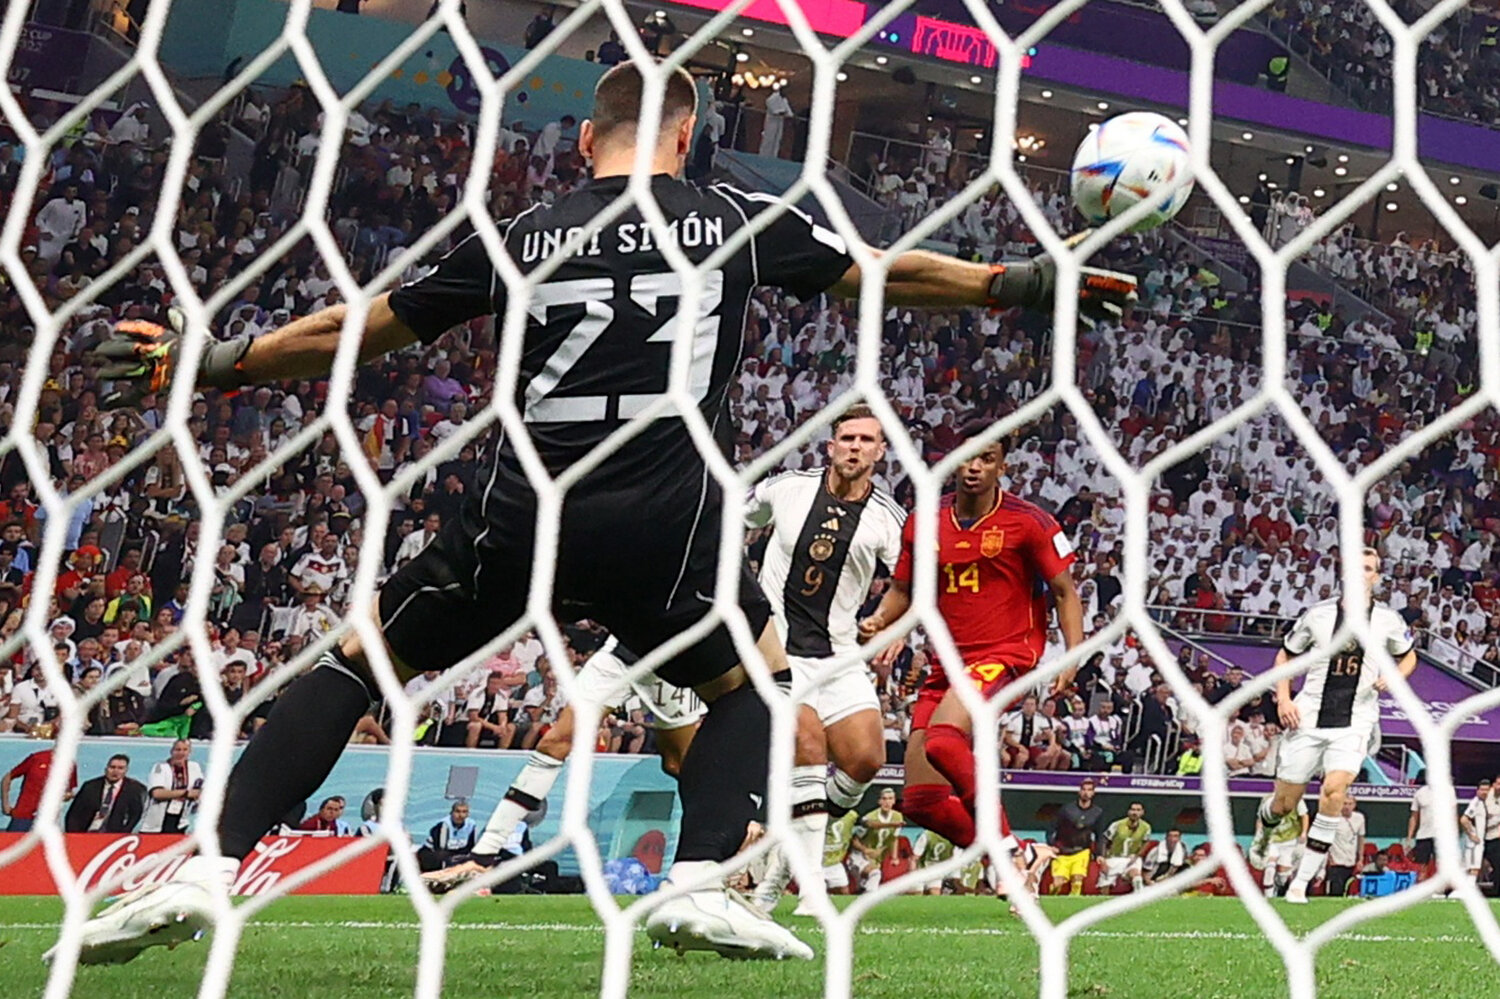 Live: Germany Preserves its World Cup Chances With a Late Goal to Tie Spain  – The New York Times